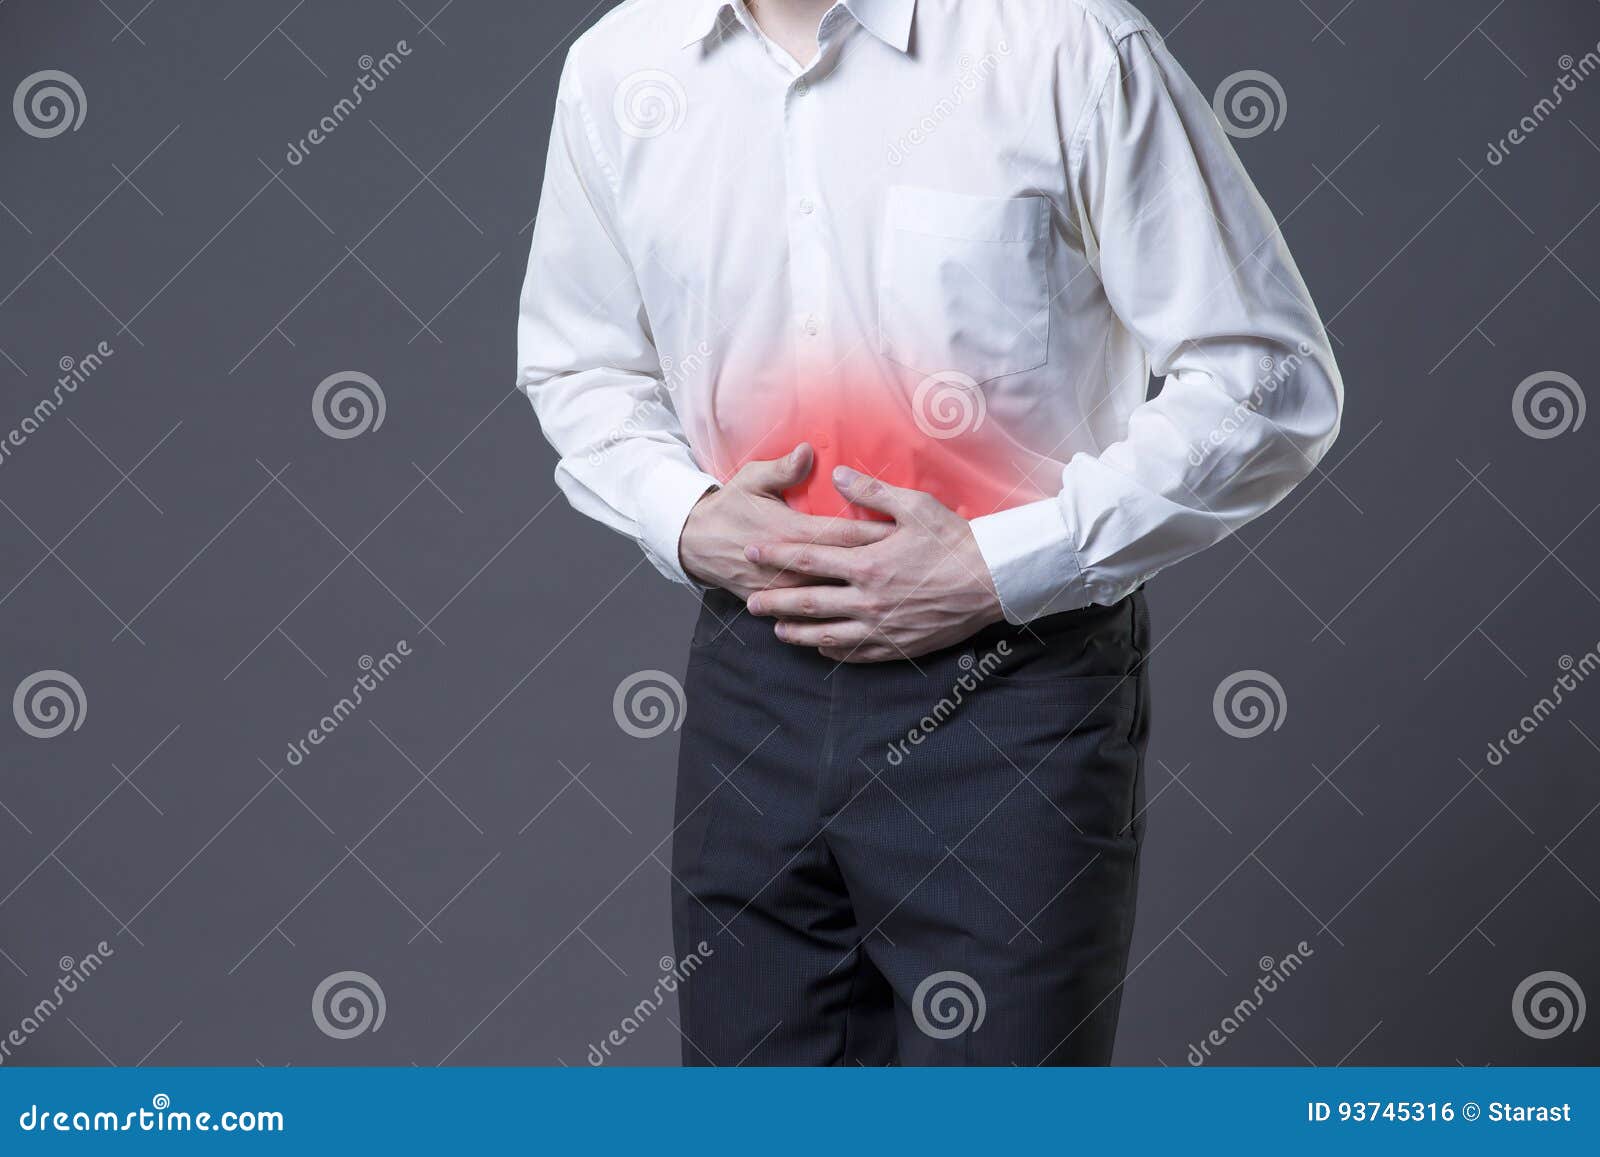 man with abdominal pain, stomach ache on gray background